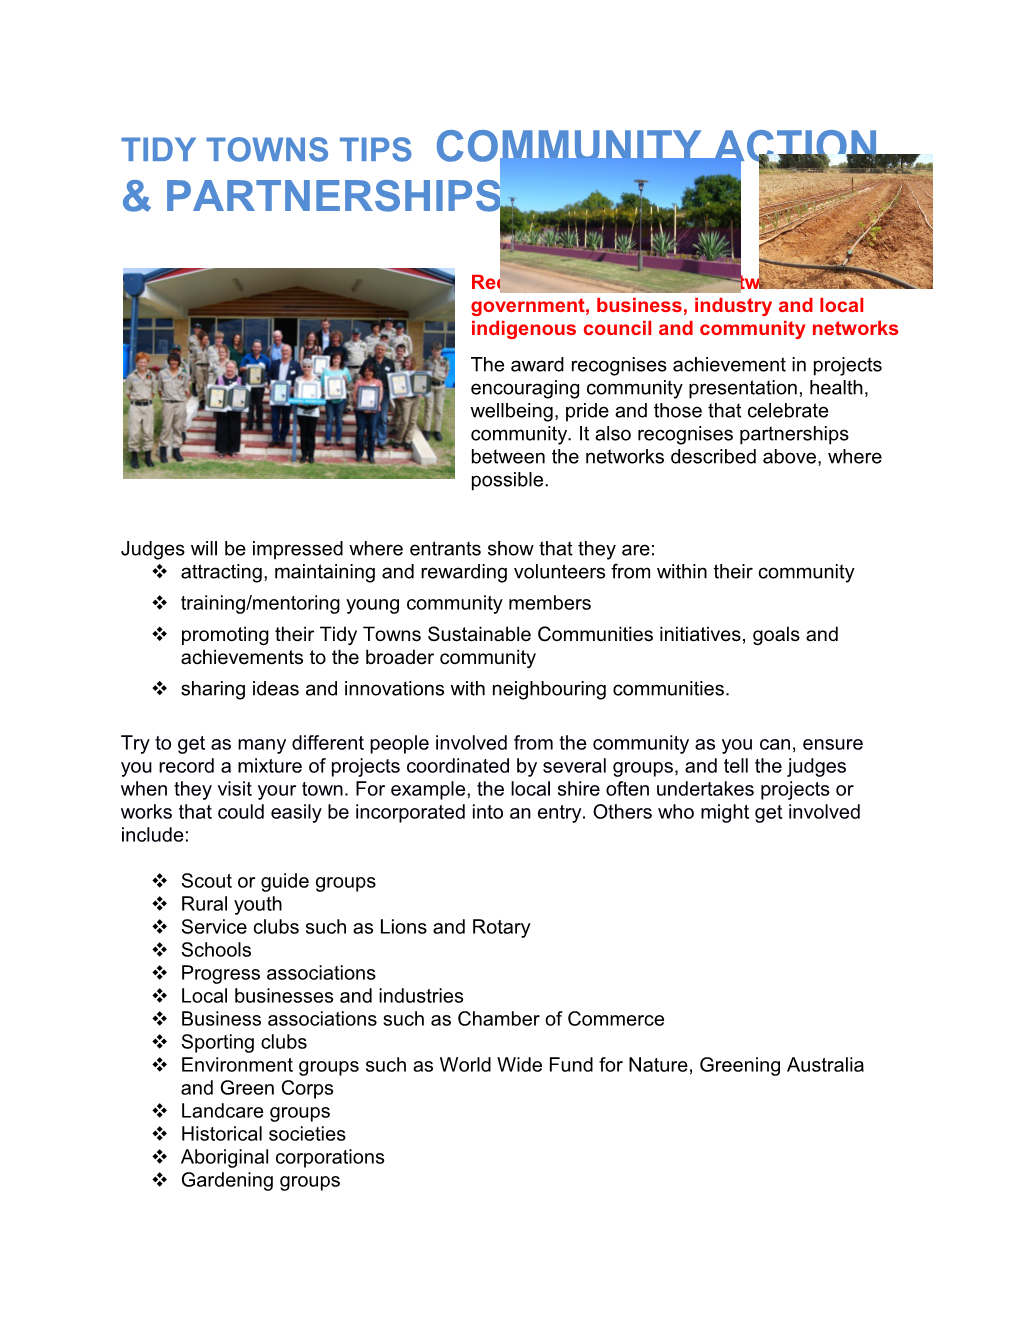 Recognises Partnerships Between Government, Business, Industry and Local Indigenous Council